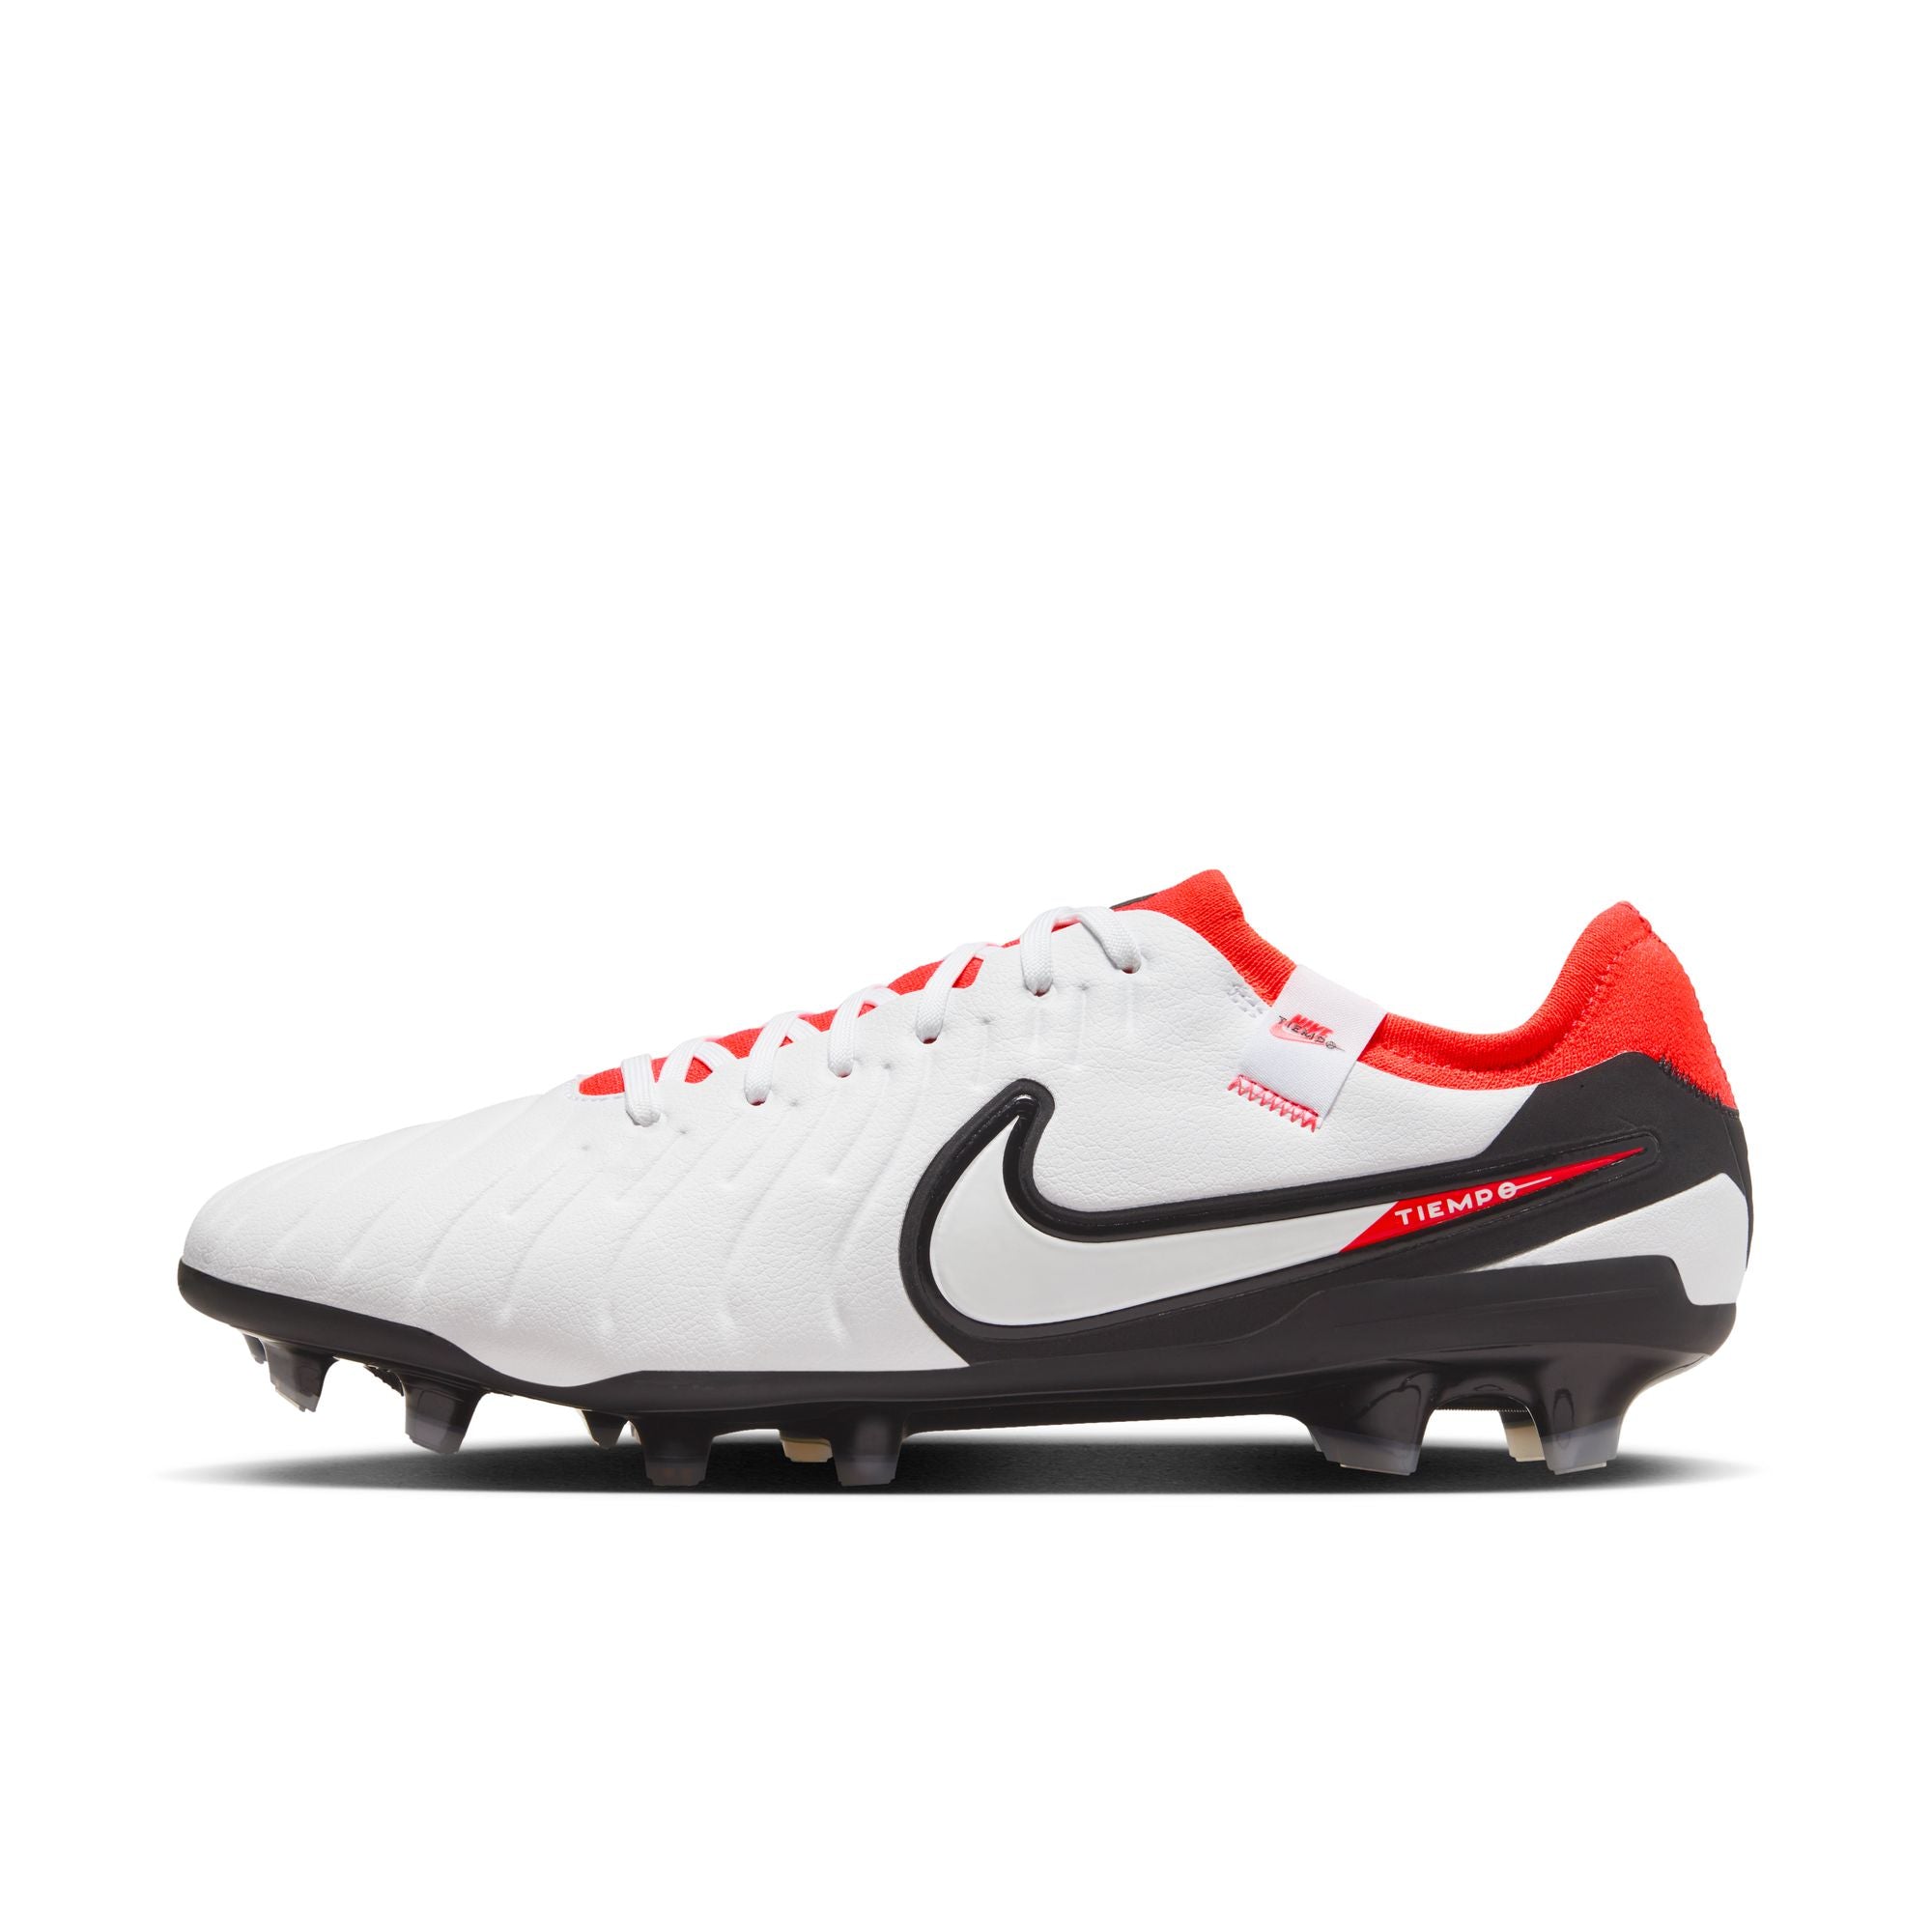 Nike Tiempo Legend 10 Pro Firm-Ground Soccer Cleats